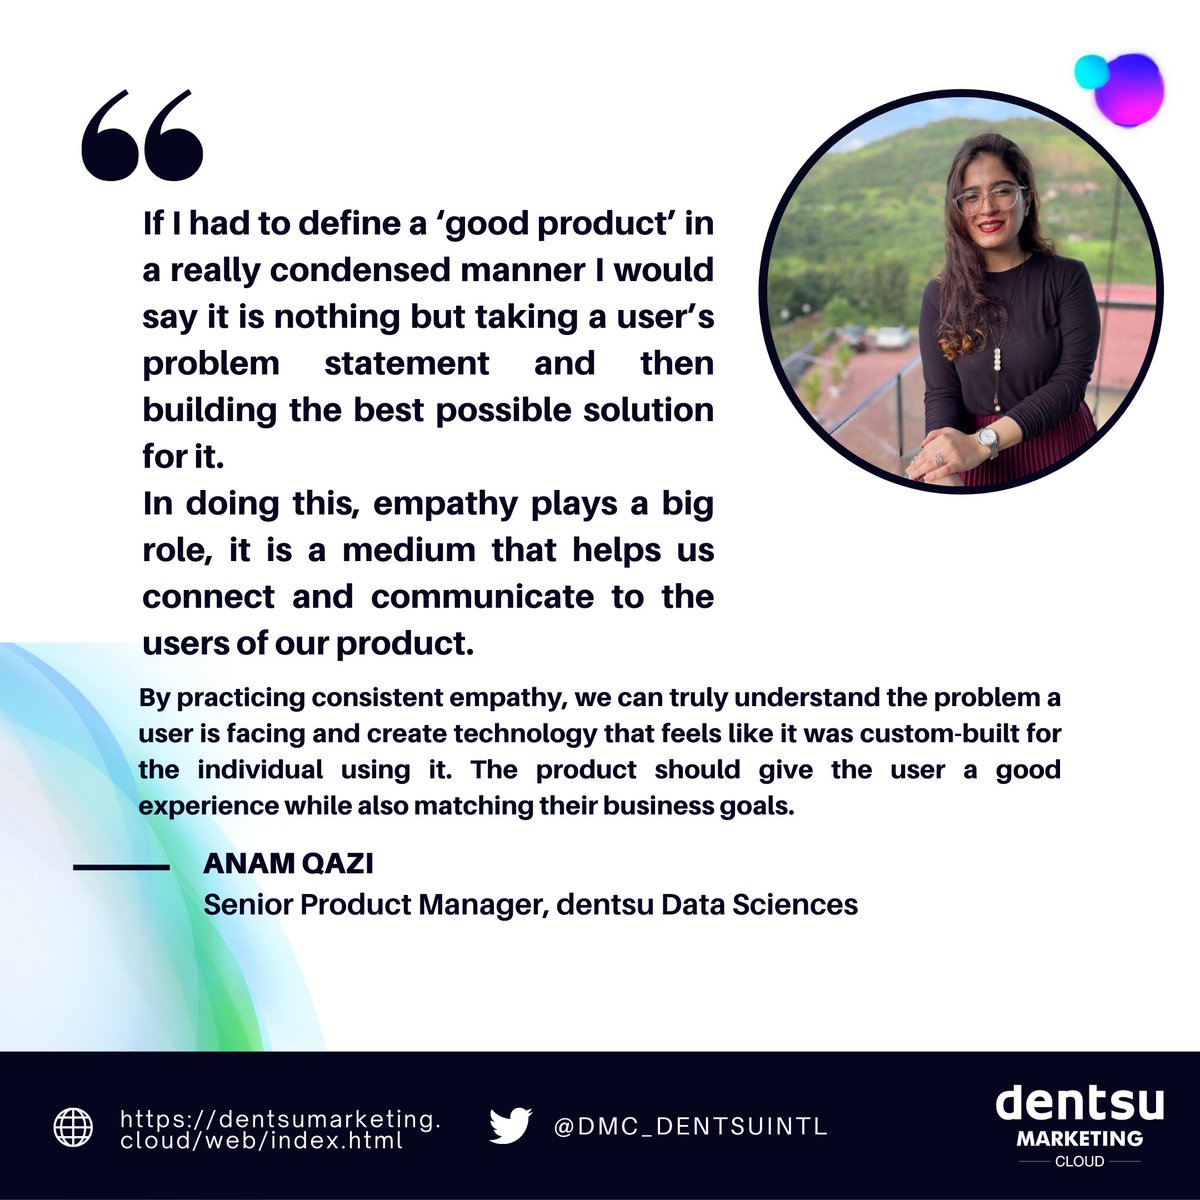 Our Senior Product manager Anam Qazi shares her thoughts on the importance of empathy in building good products. Stay tuned for more from her! #dentsu #dentsumarketingcloud #empathy #frontend #productamanagment